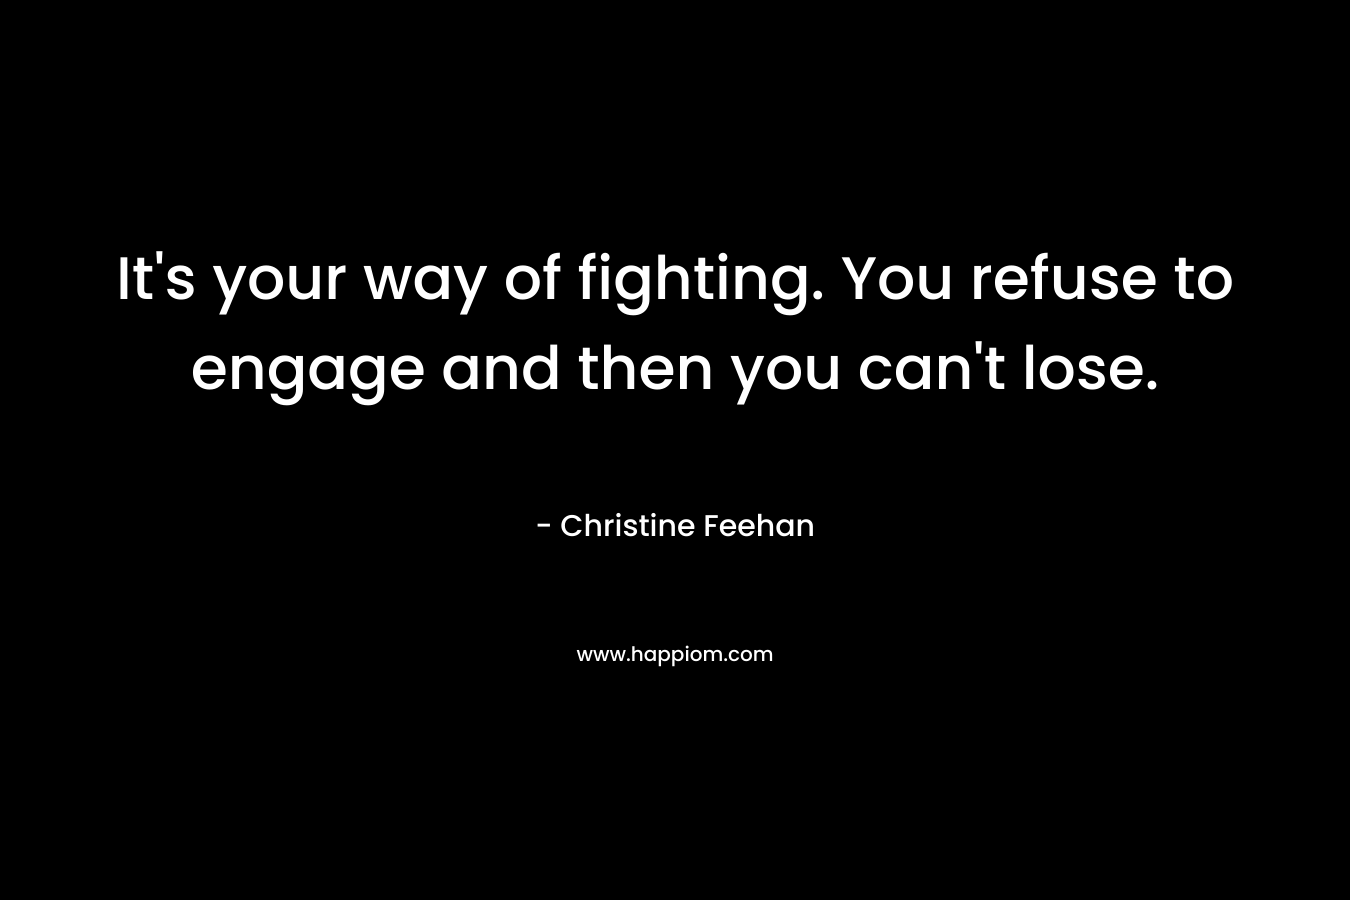 It’s your way of fighting. You refuse to engage and then you can’t lose. – Christine Feehan